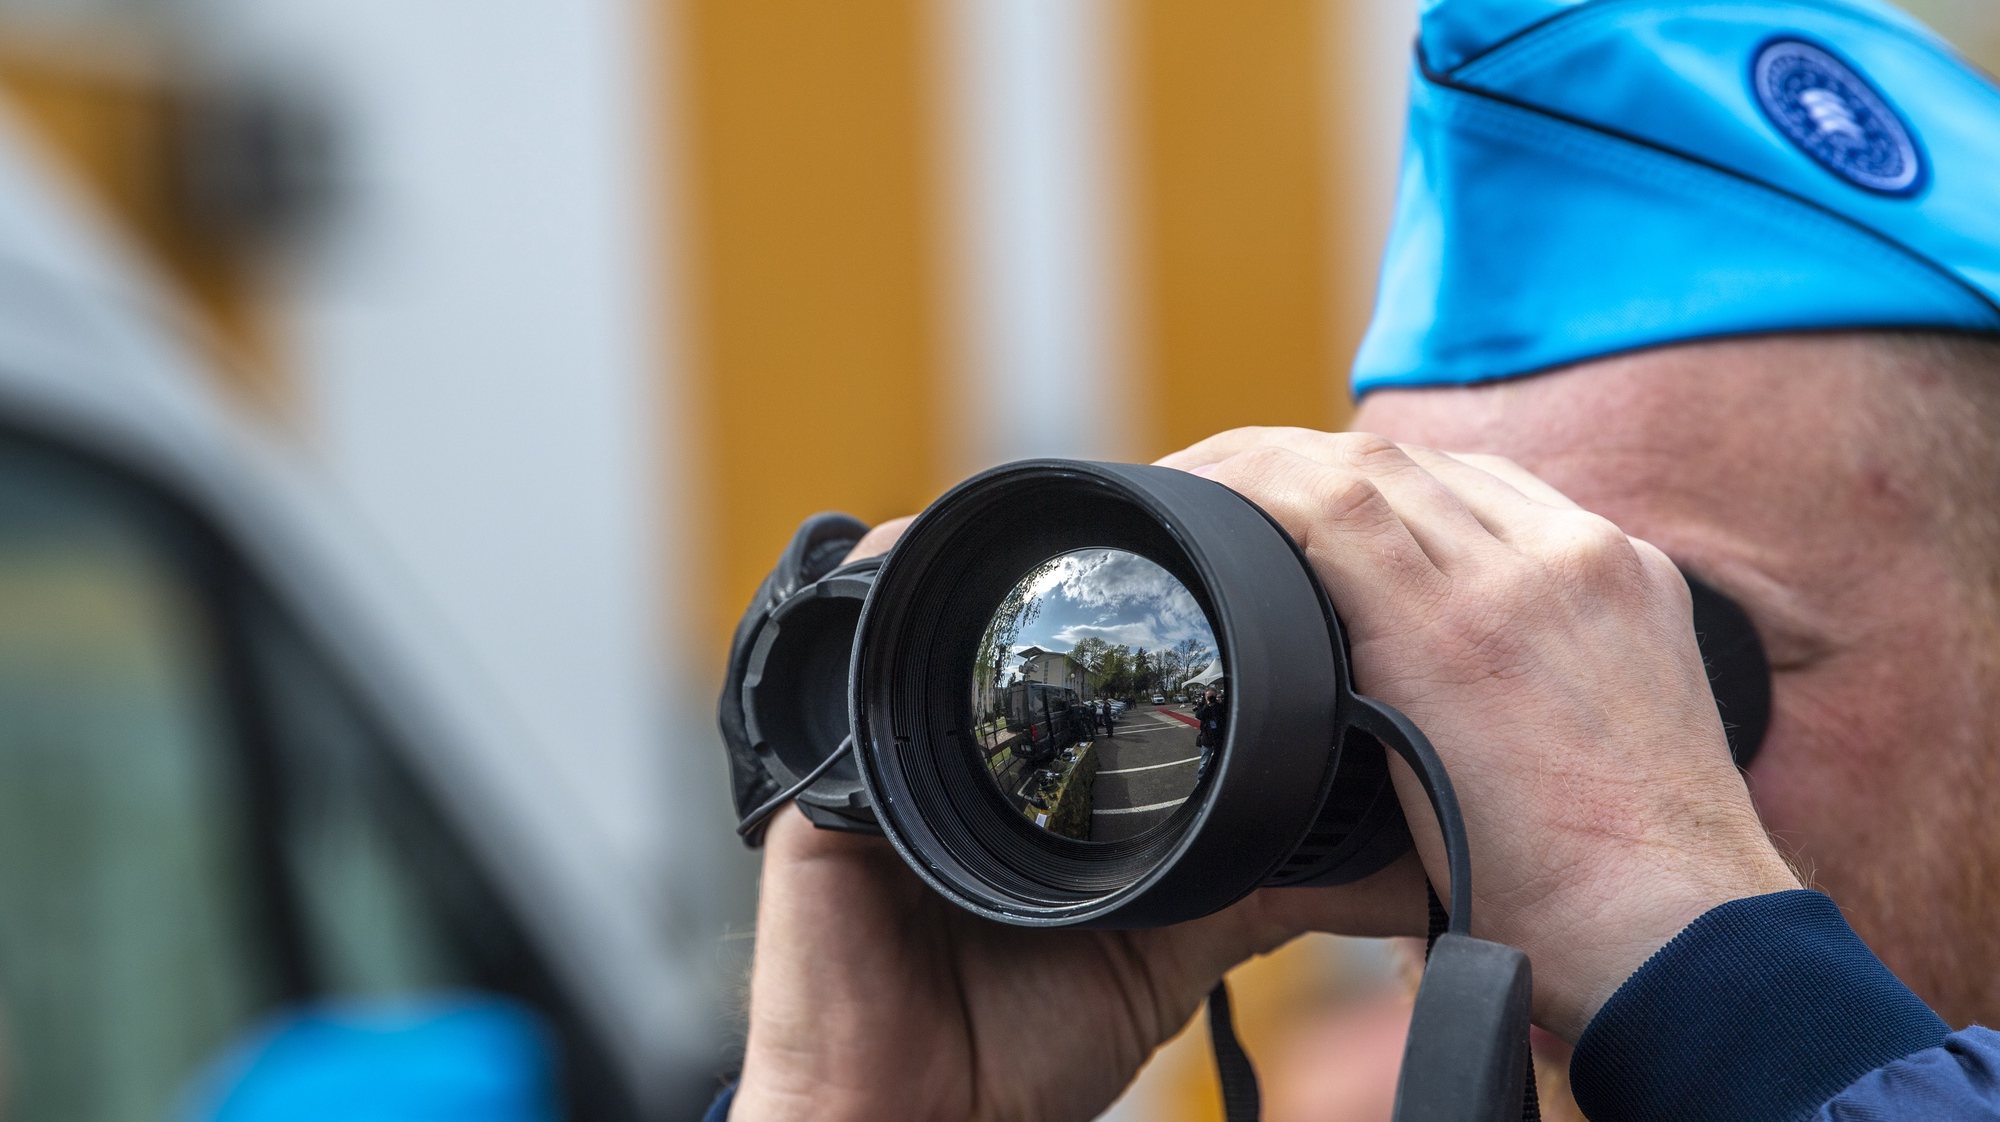 epa10581578 A member of FRONTEX looks through the monocular prior to the official launch ceremony of the FRONTEX Joint Operation in Skopje, Republic of North Macedonia, 20 April 2023. It is planned that in 2023, FRONTEX will deploy more than 100 officers, patrol vehicles and special equipment on the Macedonian-Greek border, which will significantly increase the capacity to detect illegal activities along the border, while respecting and protecting the basic rights of every person.  EPA/GEORGI LICOVSKI